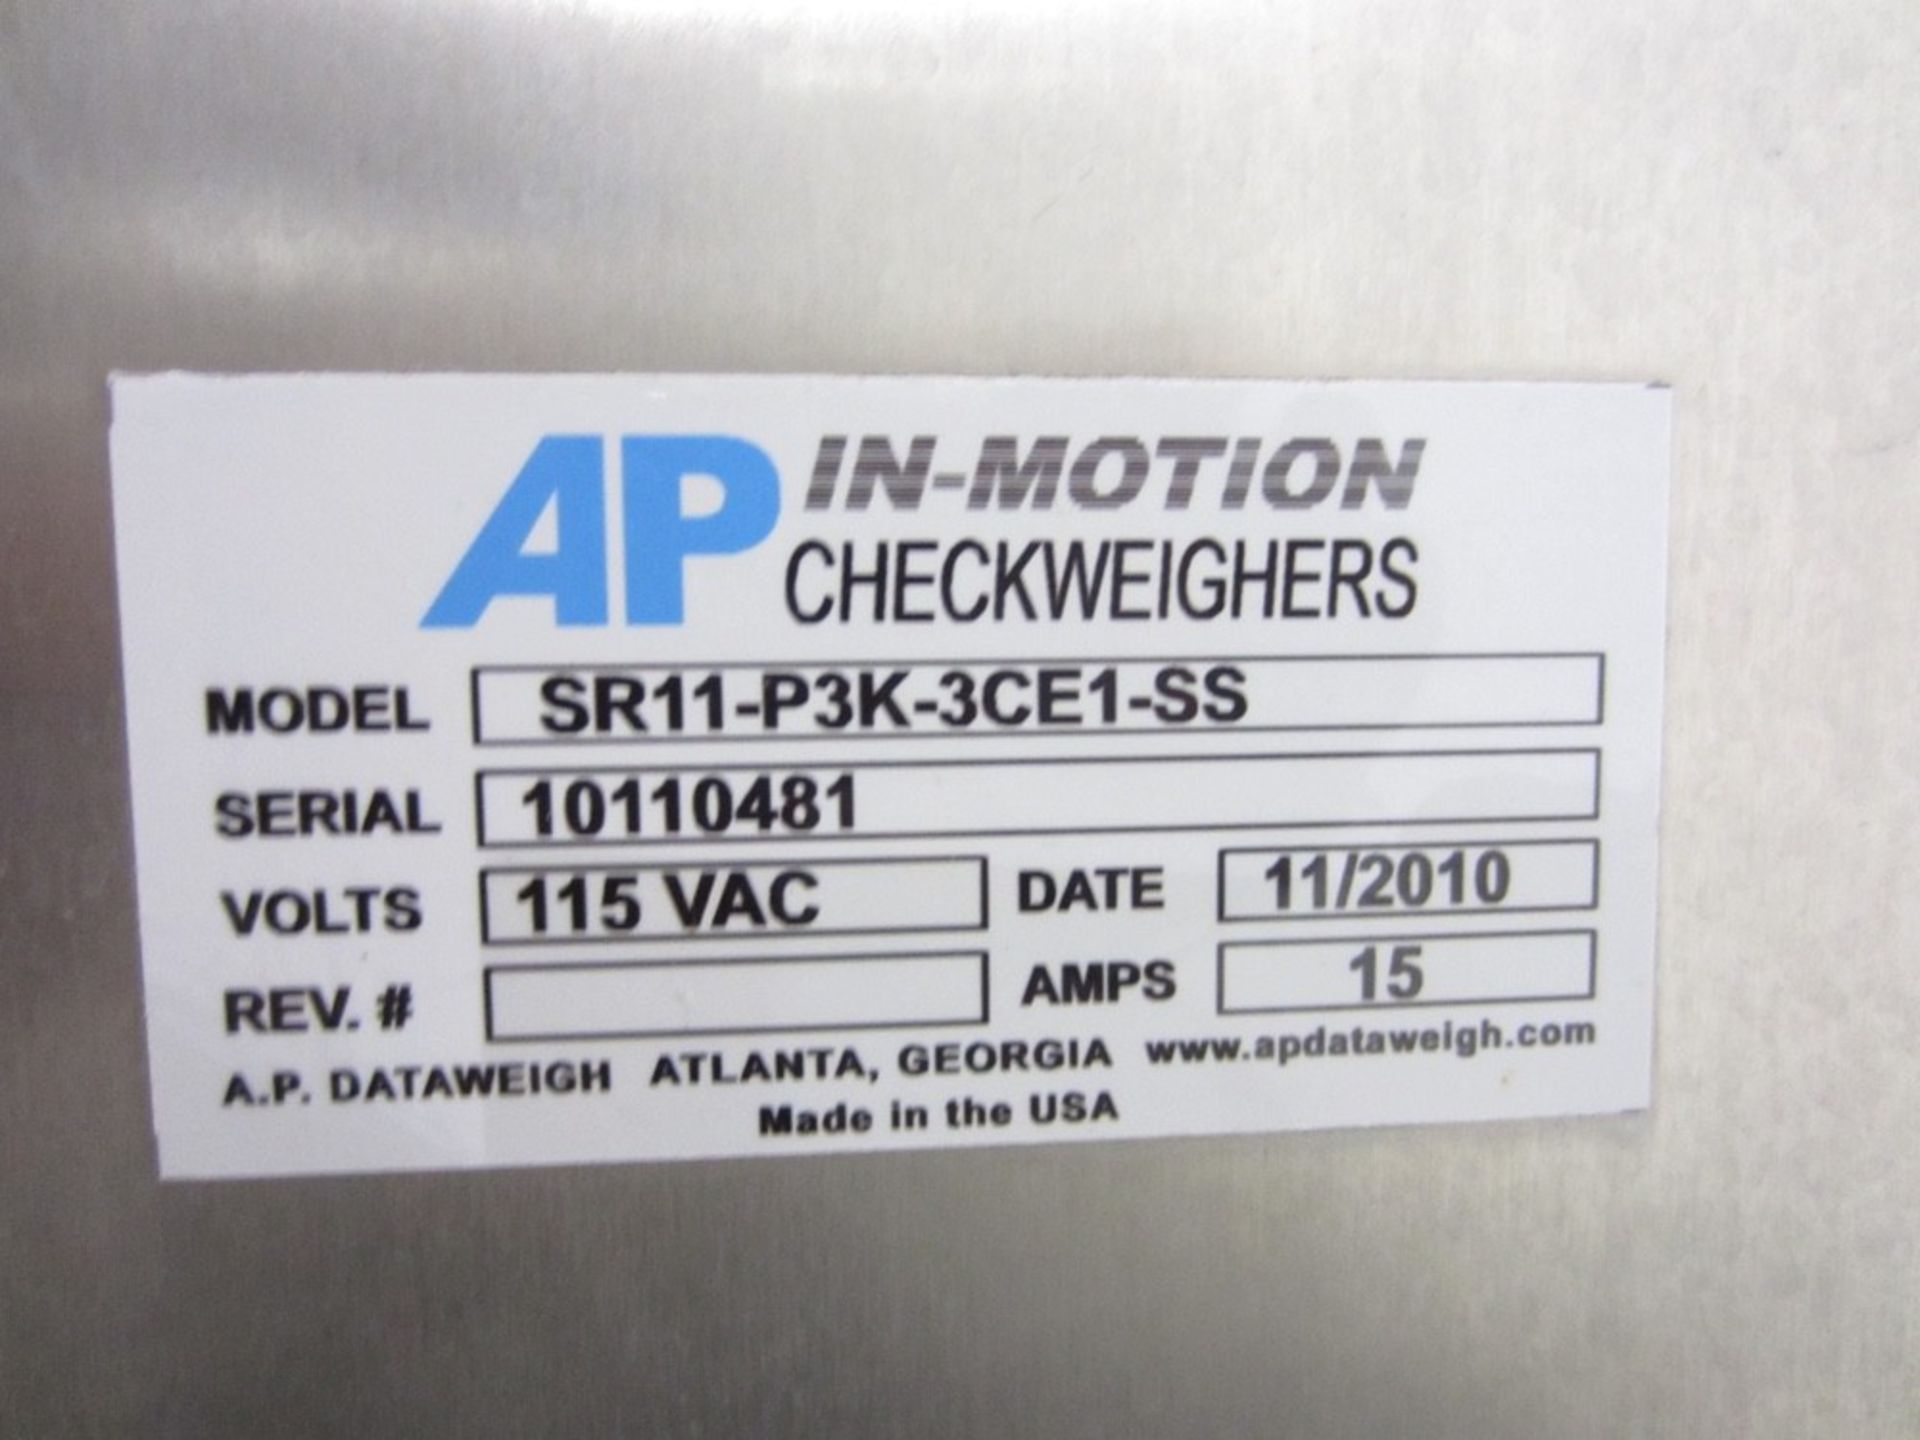 AP Model SR11-P3K-3CE1-SS Checkweigher | Seller to Load at No Cost - Image 2 of 5